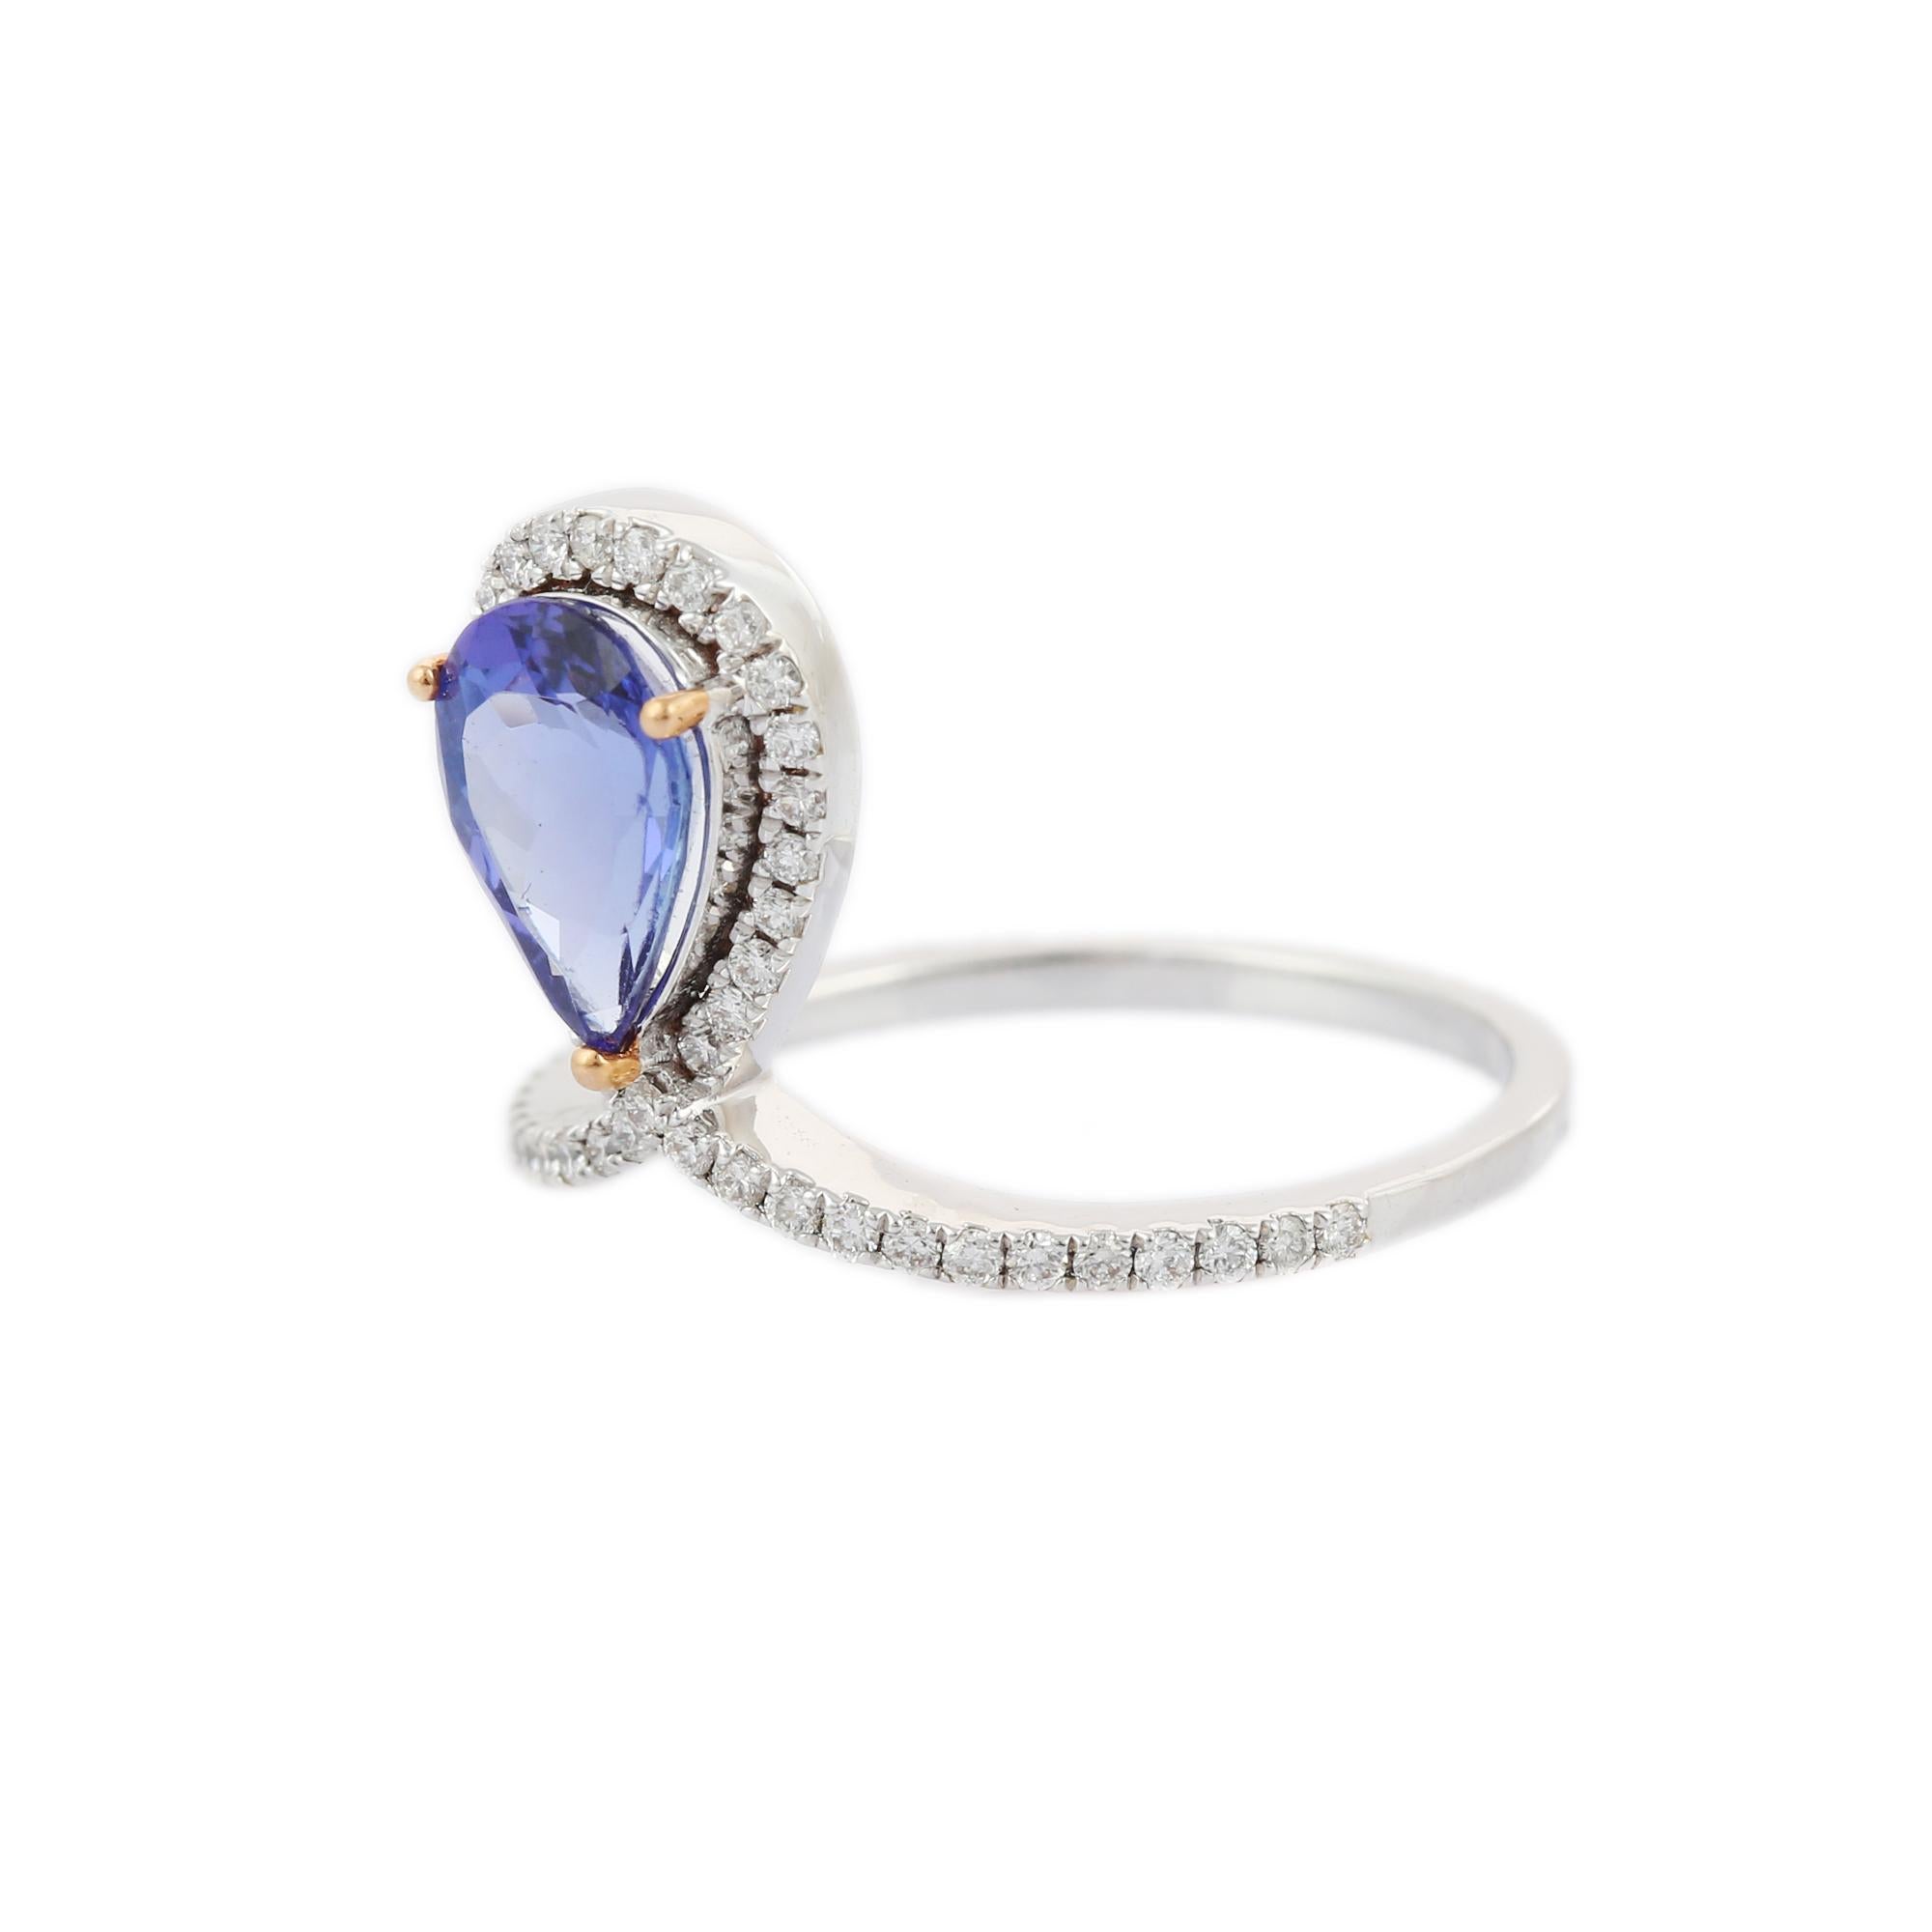 For Sale:  18K Tanzanite and Diamond Ring in White Gold Pear Shape 1.19 Carat  4